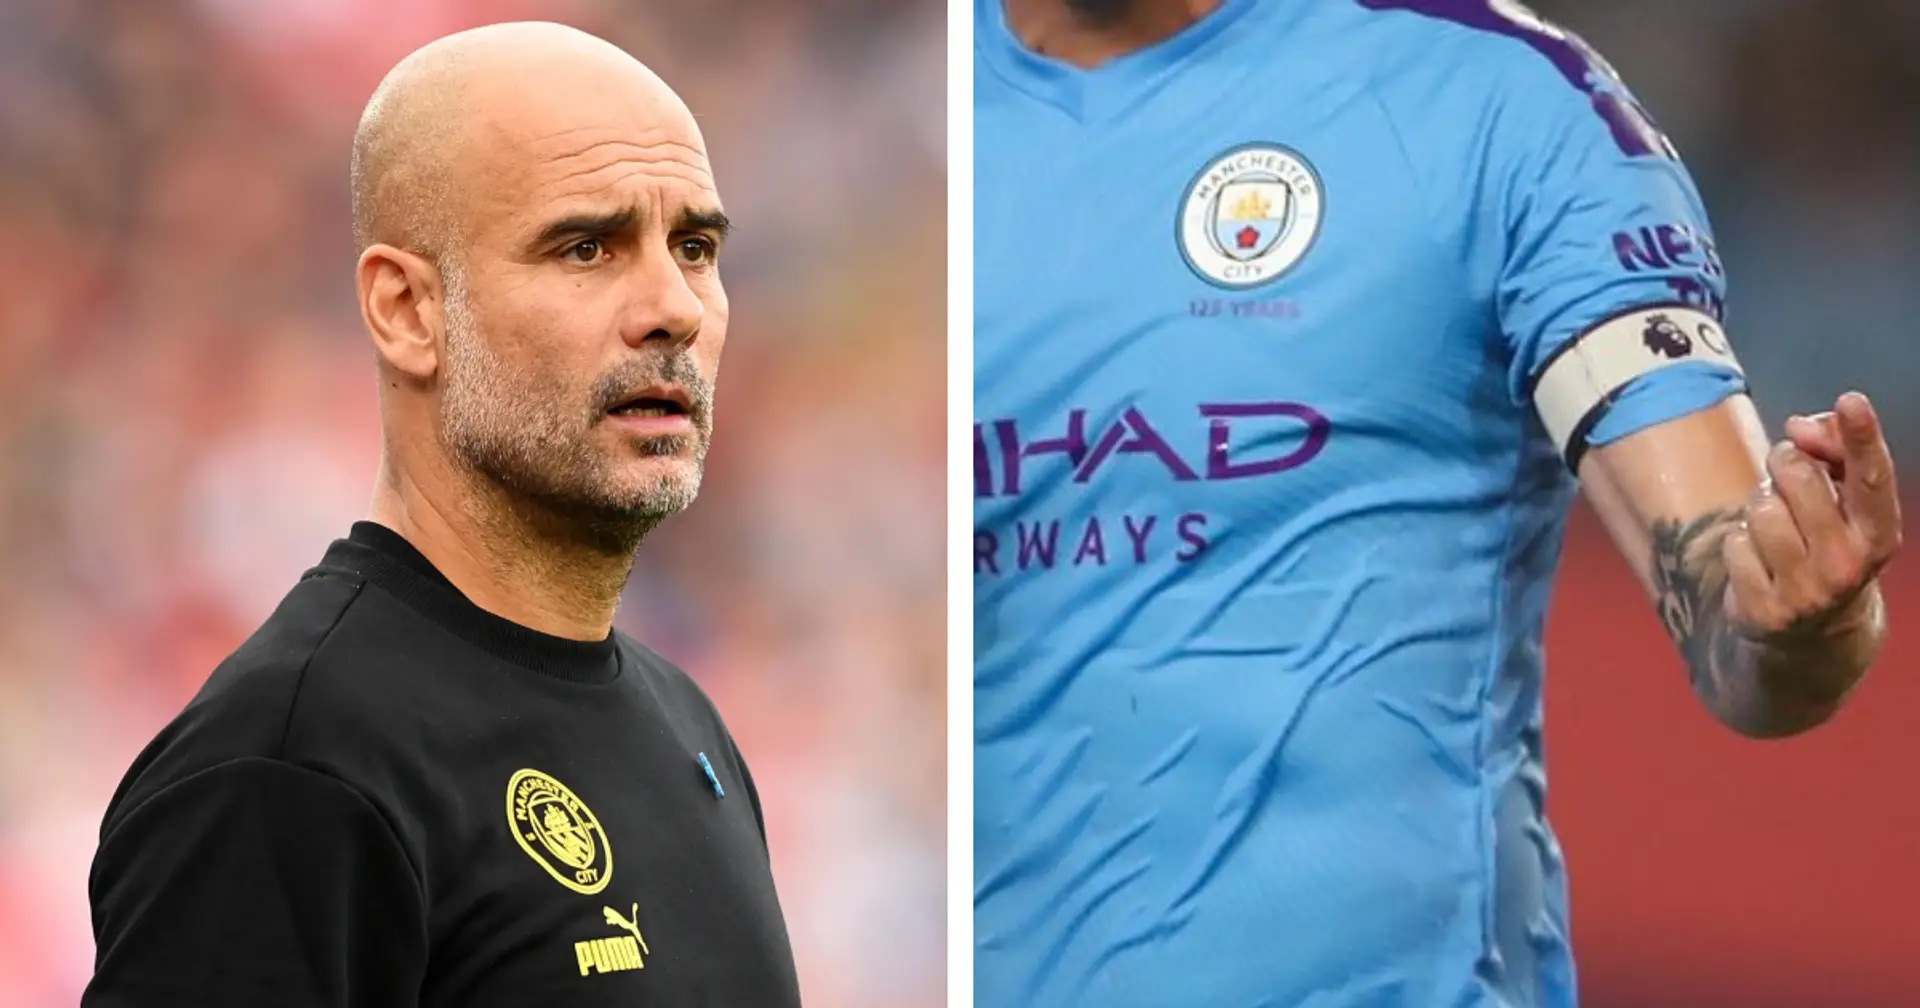 New Manchester City captain revealed — he was not chosen by Pep Guardiola